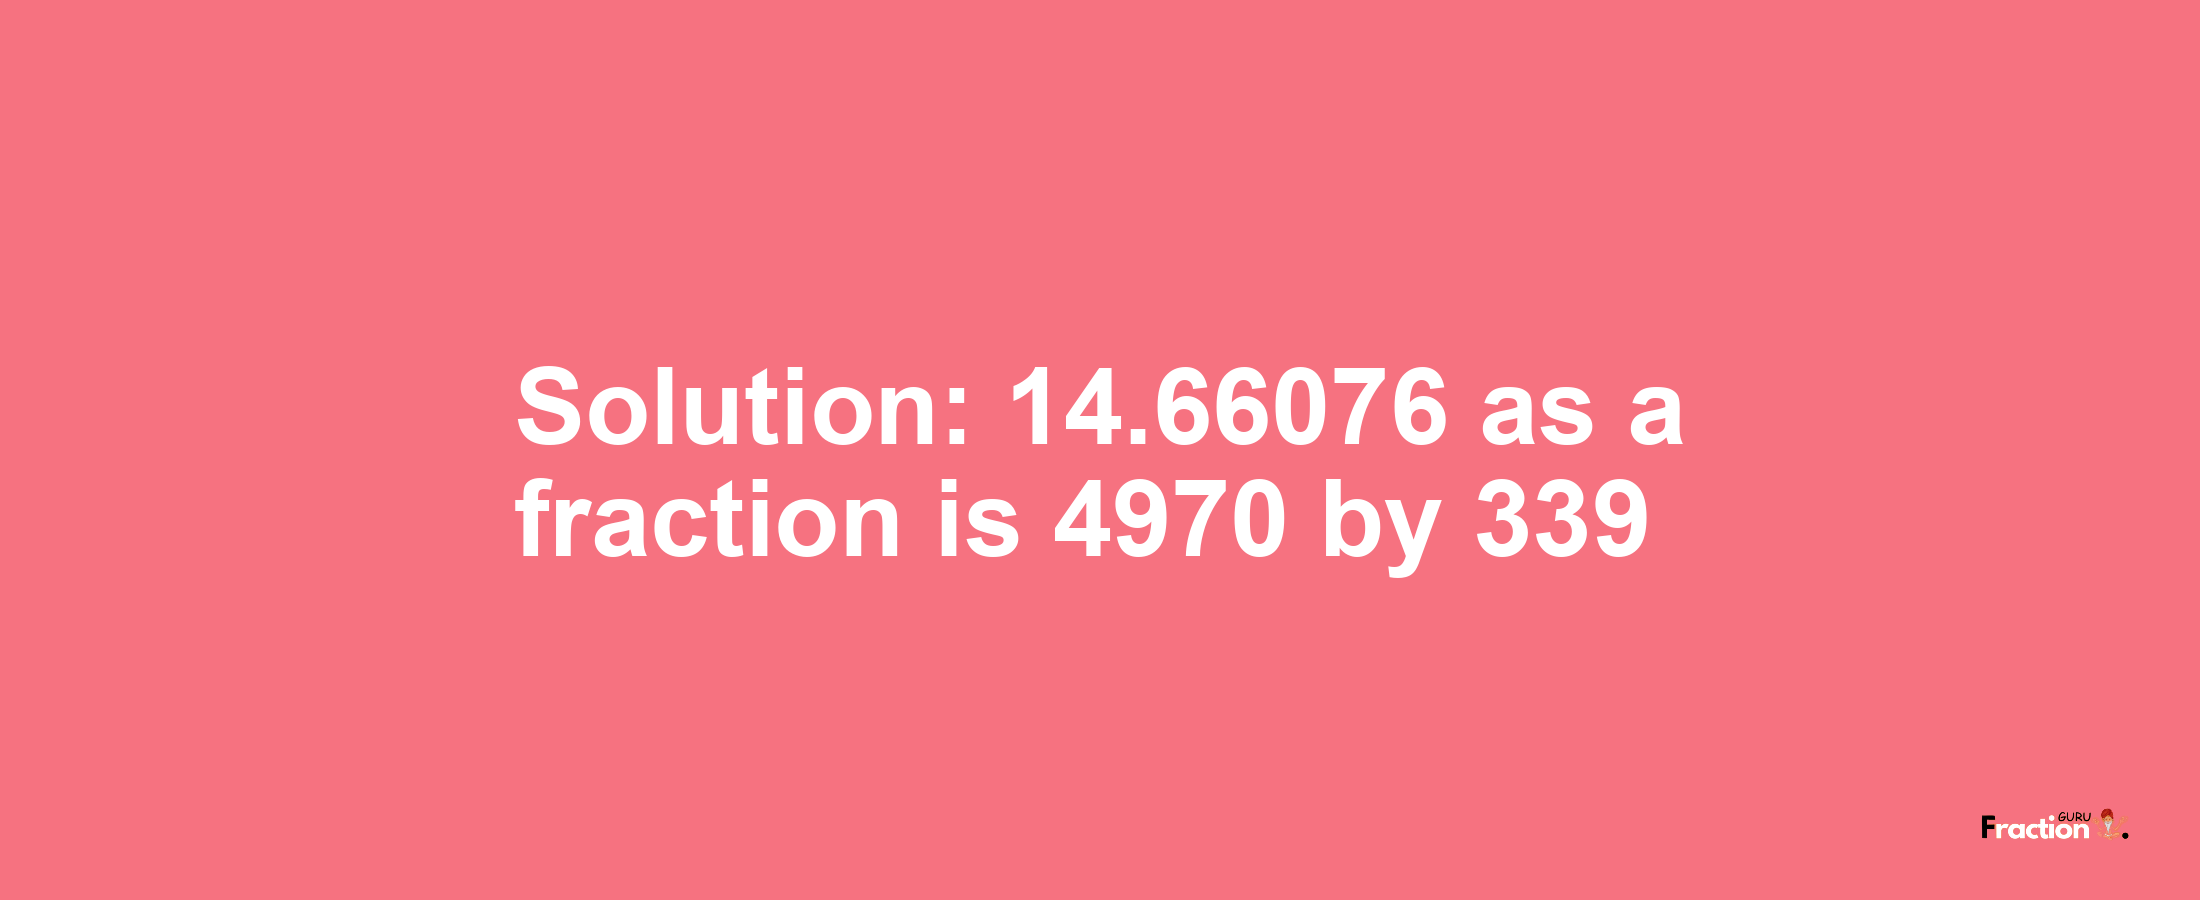 Solution:14.66076 as a fraction is 4970/339